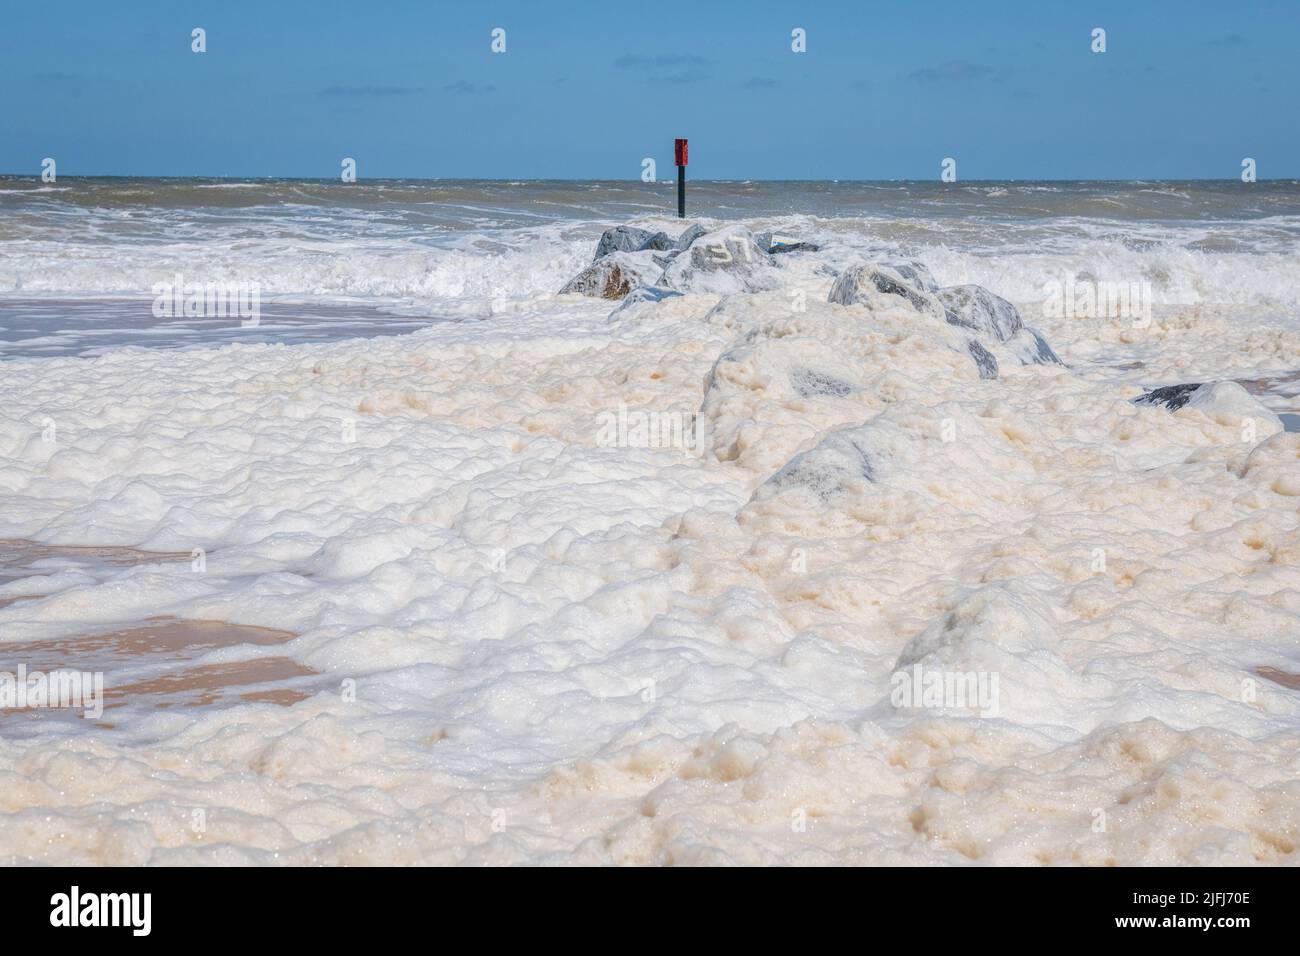 Sea foam, ocean foam, beach foam, or spume is a type of foam created by the agitation of seawater, on the beach at Horsey, Norfolk, England. Stock Photo